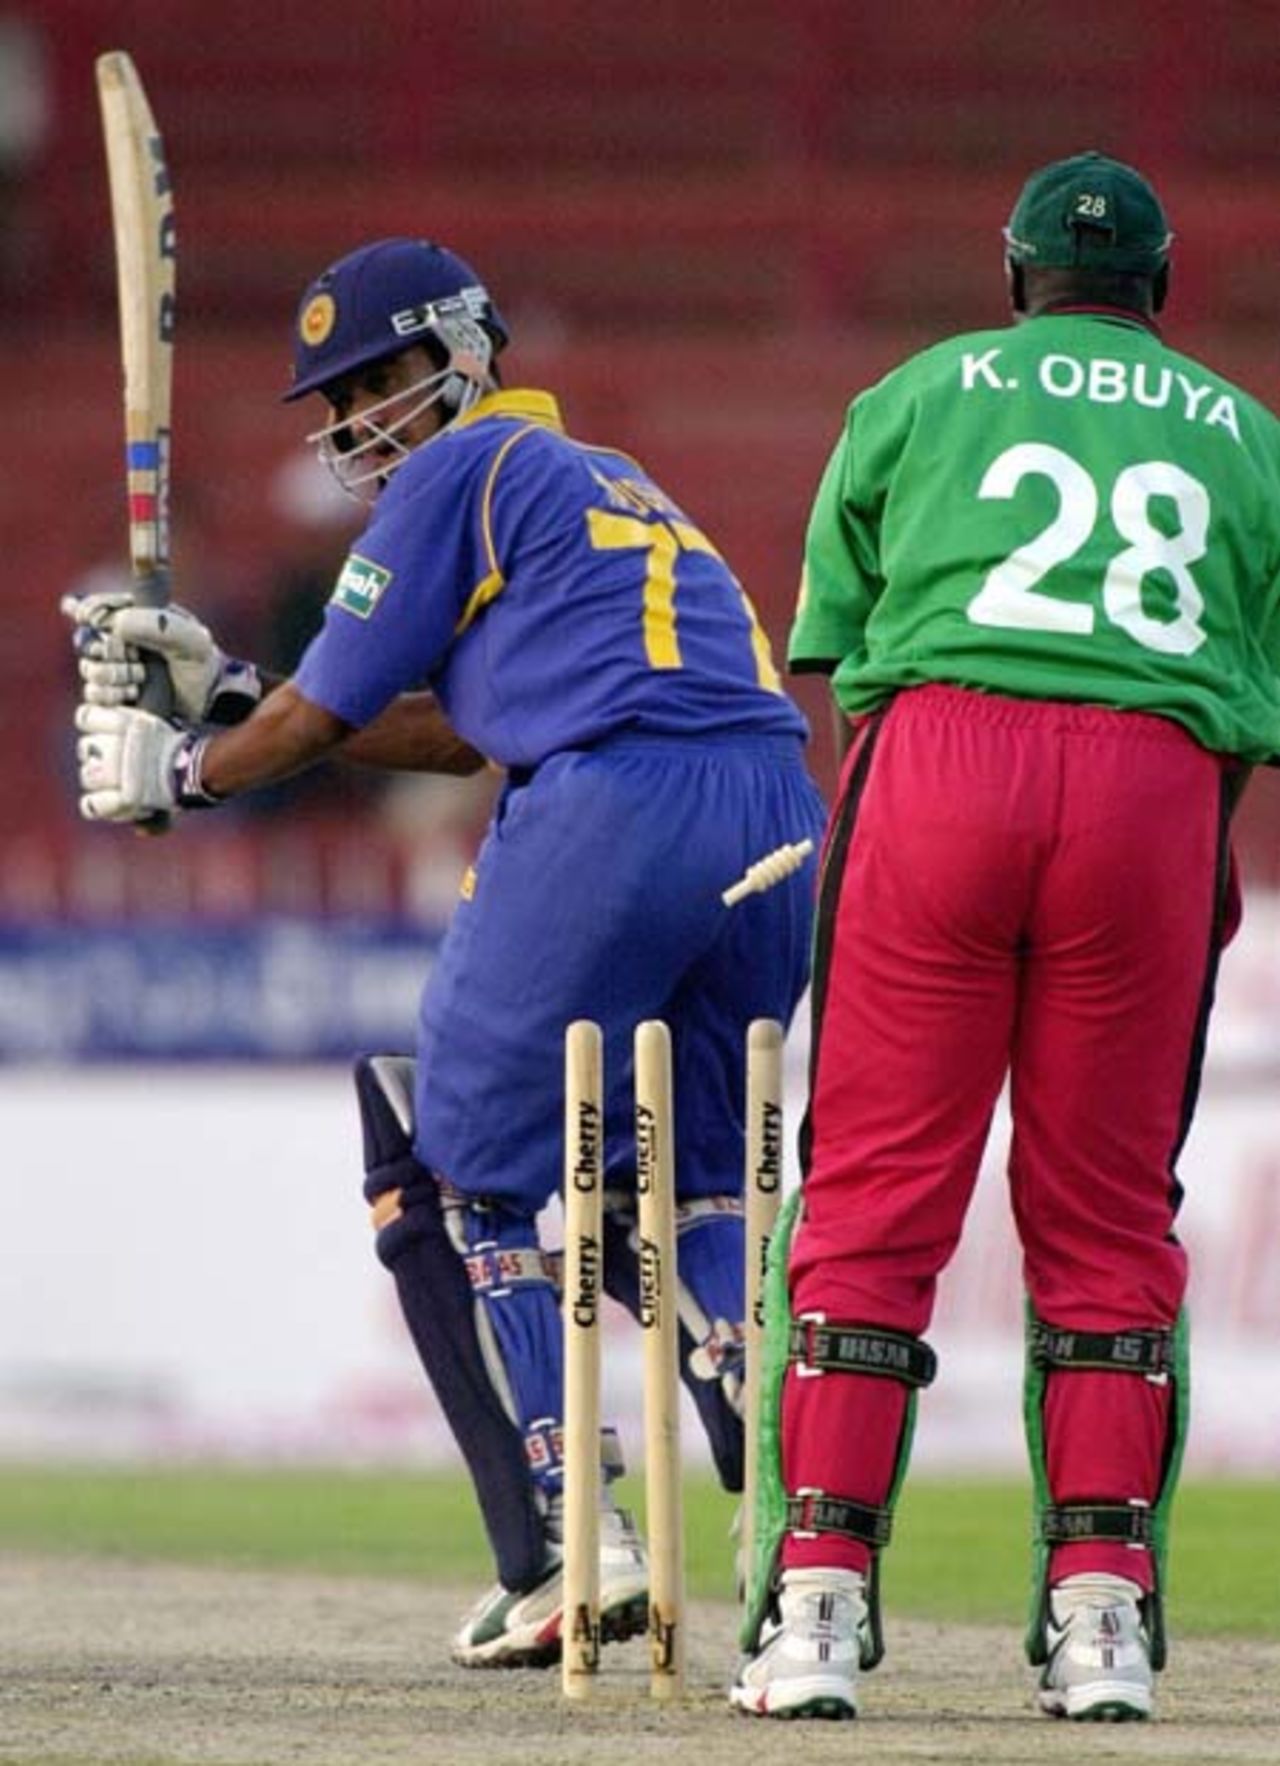 Sri Lankan batsman Kaushal Lokuarachchi (L) watches his shattered stumps off Kenyan pacer Tony Suji during the 4th one-day match in the Four Nation Sharjah Cricket Tournament, 06 April 2003.